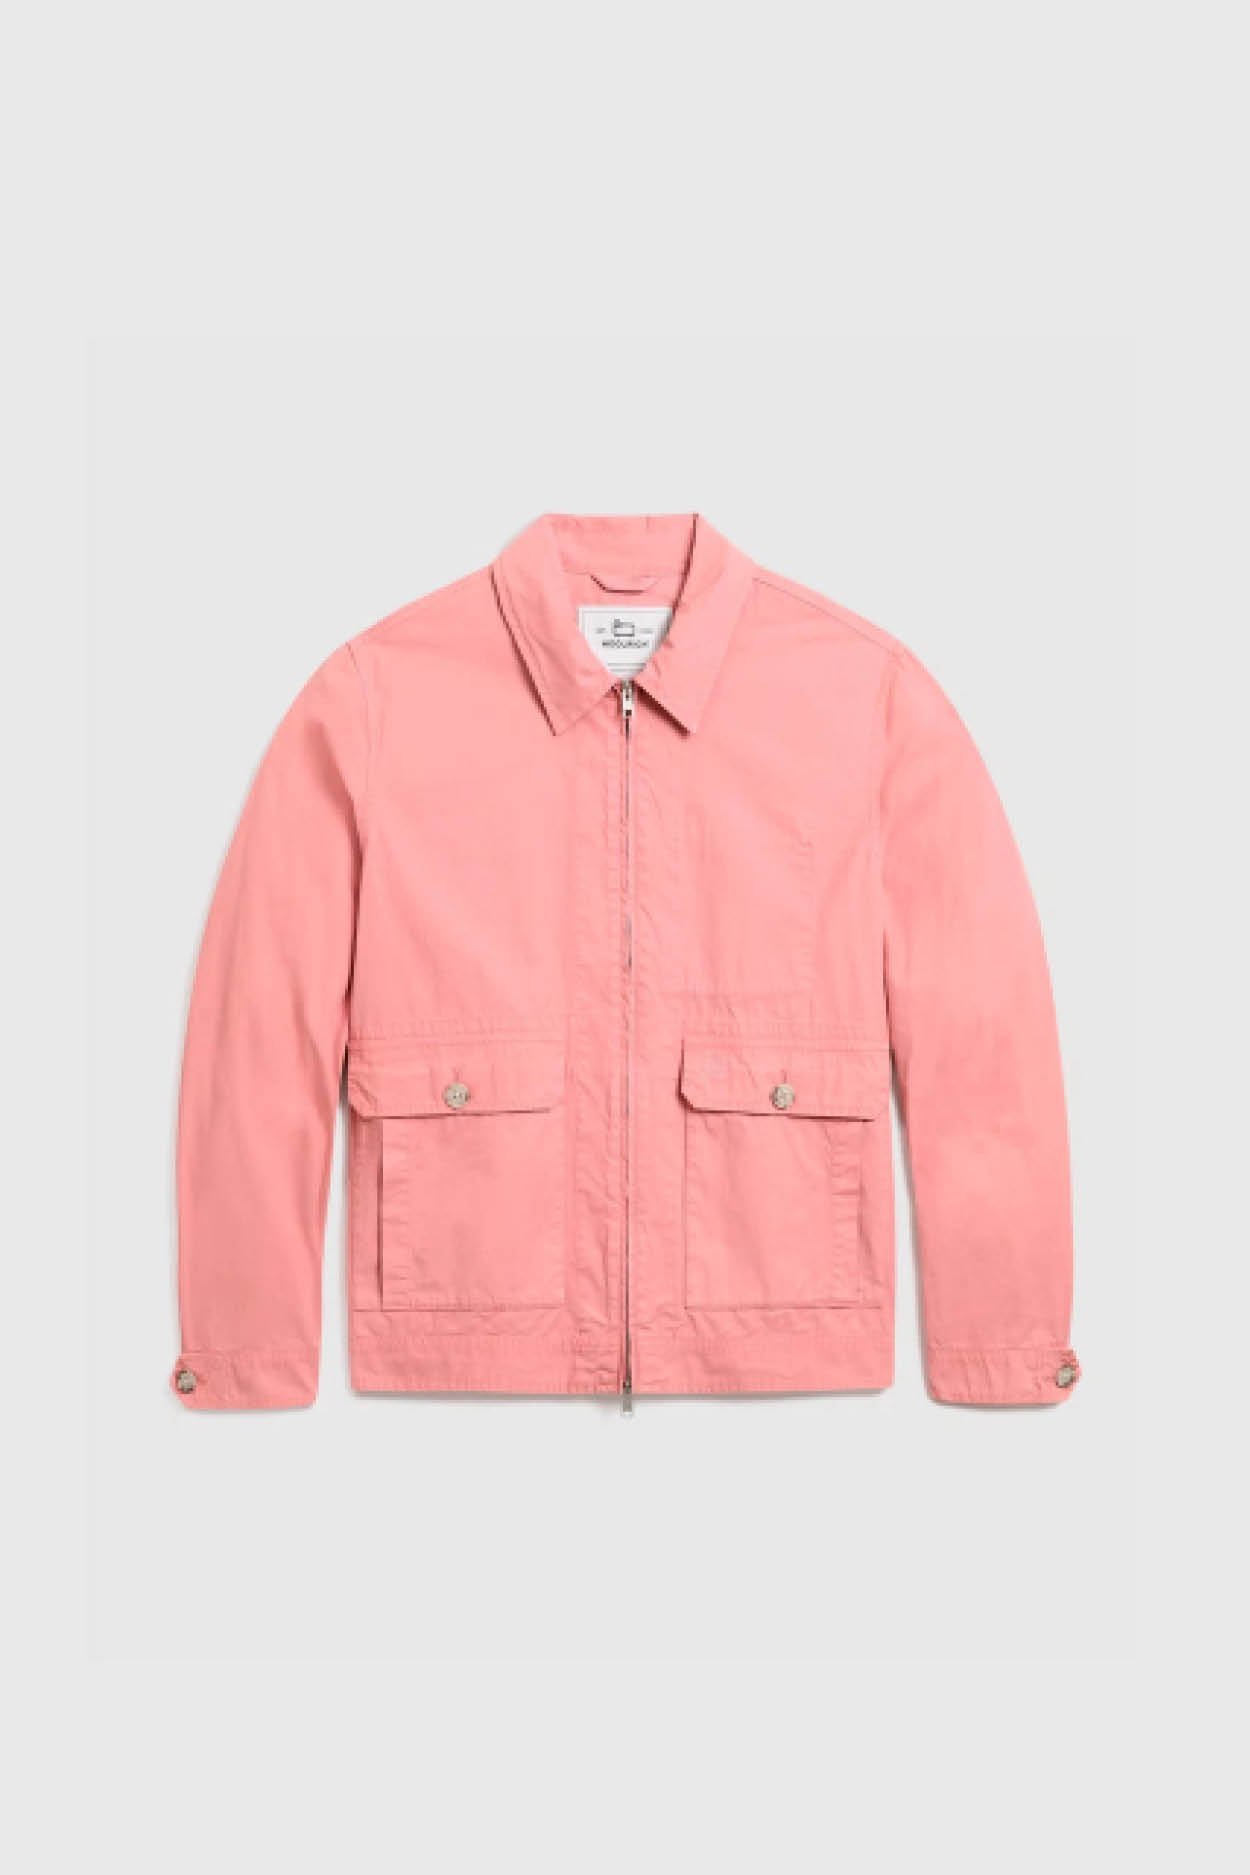 Crew short jacket in soft garment-dyed cotton